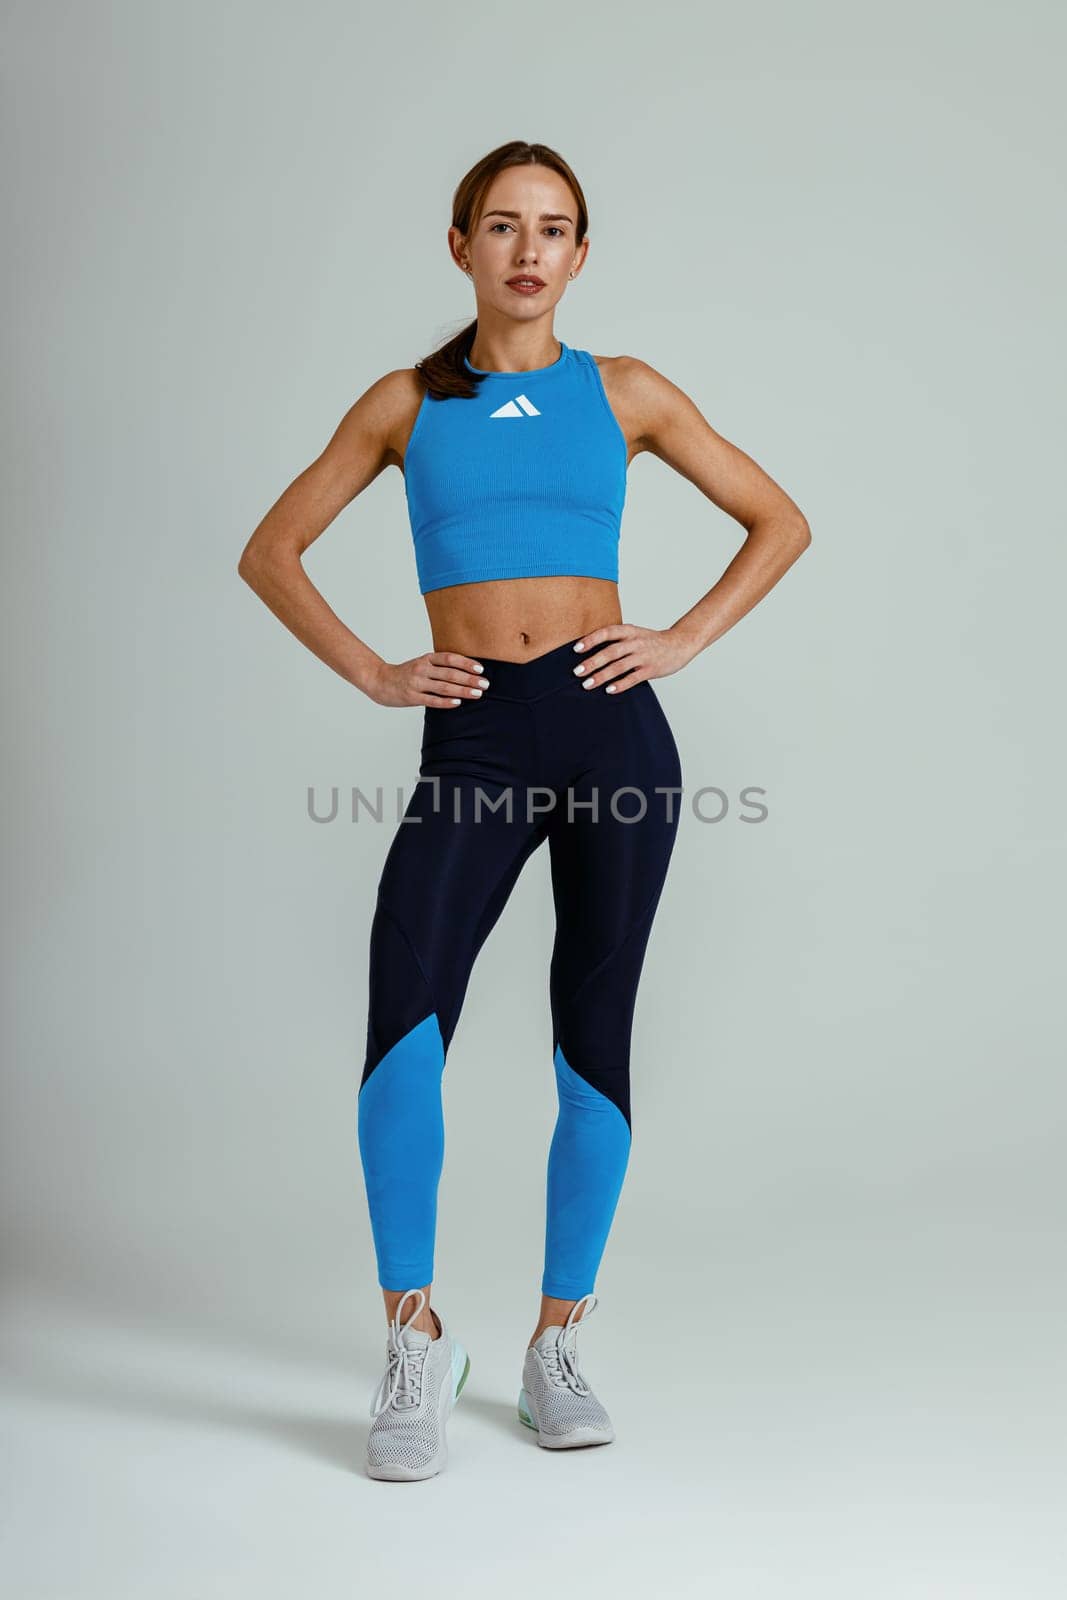 Female fitness trainer in sportswear looking at camera on studio background. High quality photo